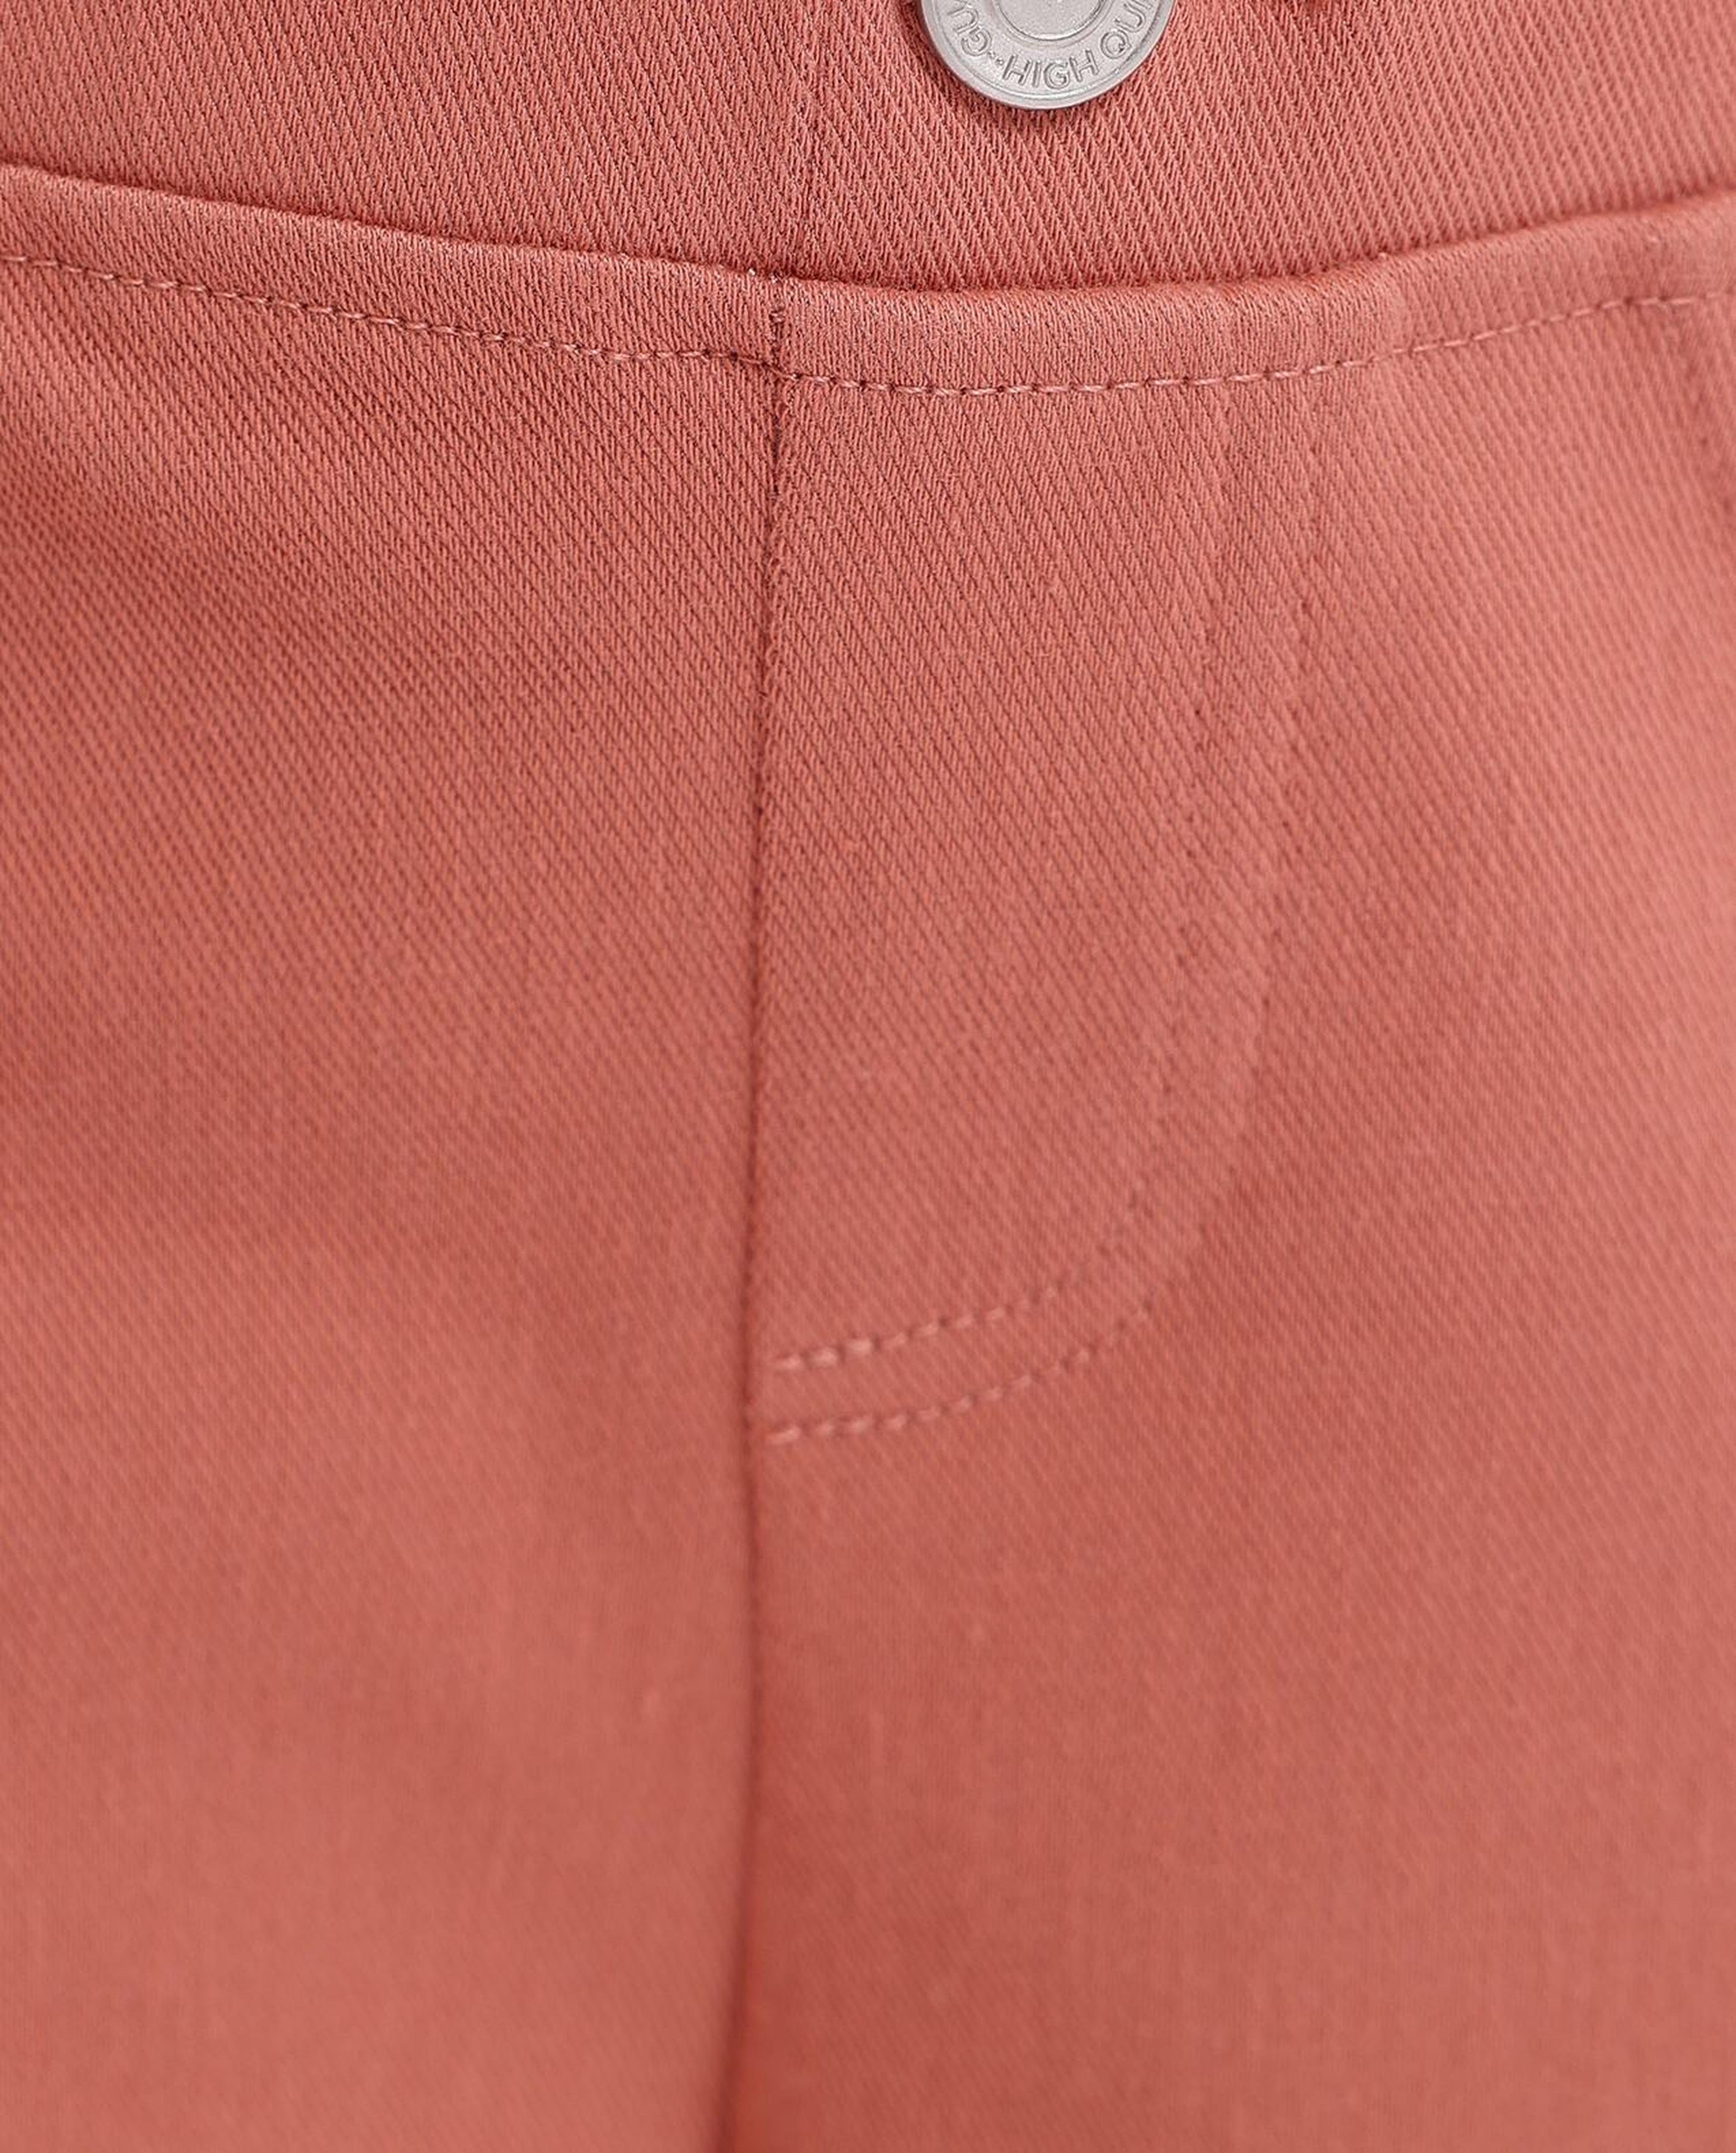 Solid Skinny Pants with Elastic Waist